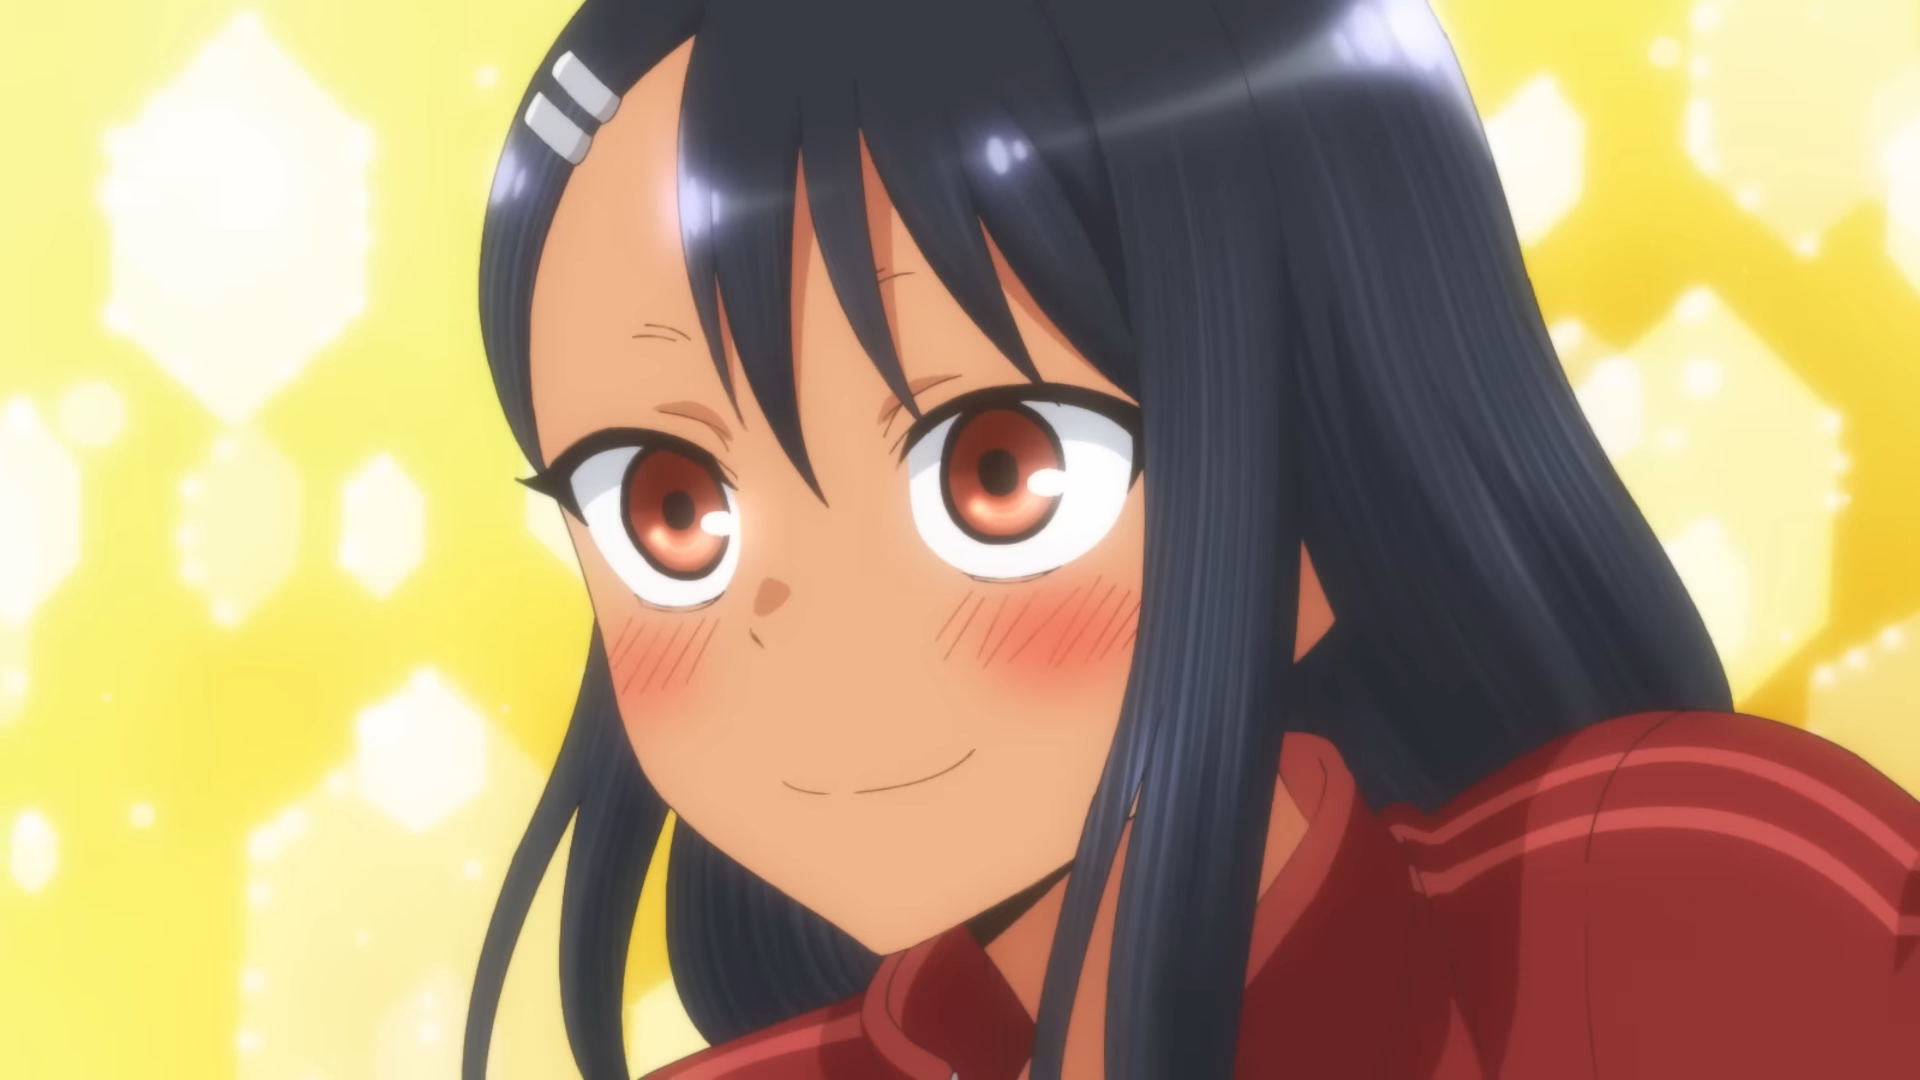 Watch Don't Toy With Me, Miss Nagatoro season 2 episode 12 streaming online